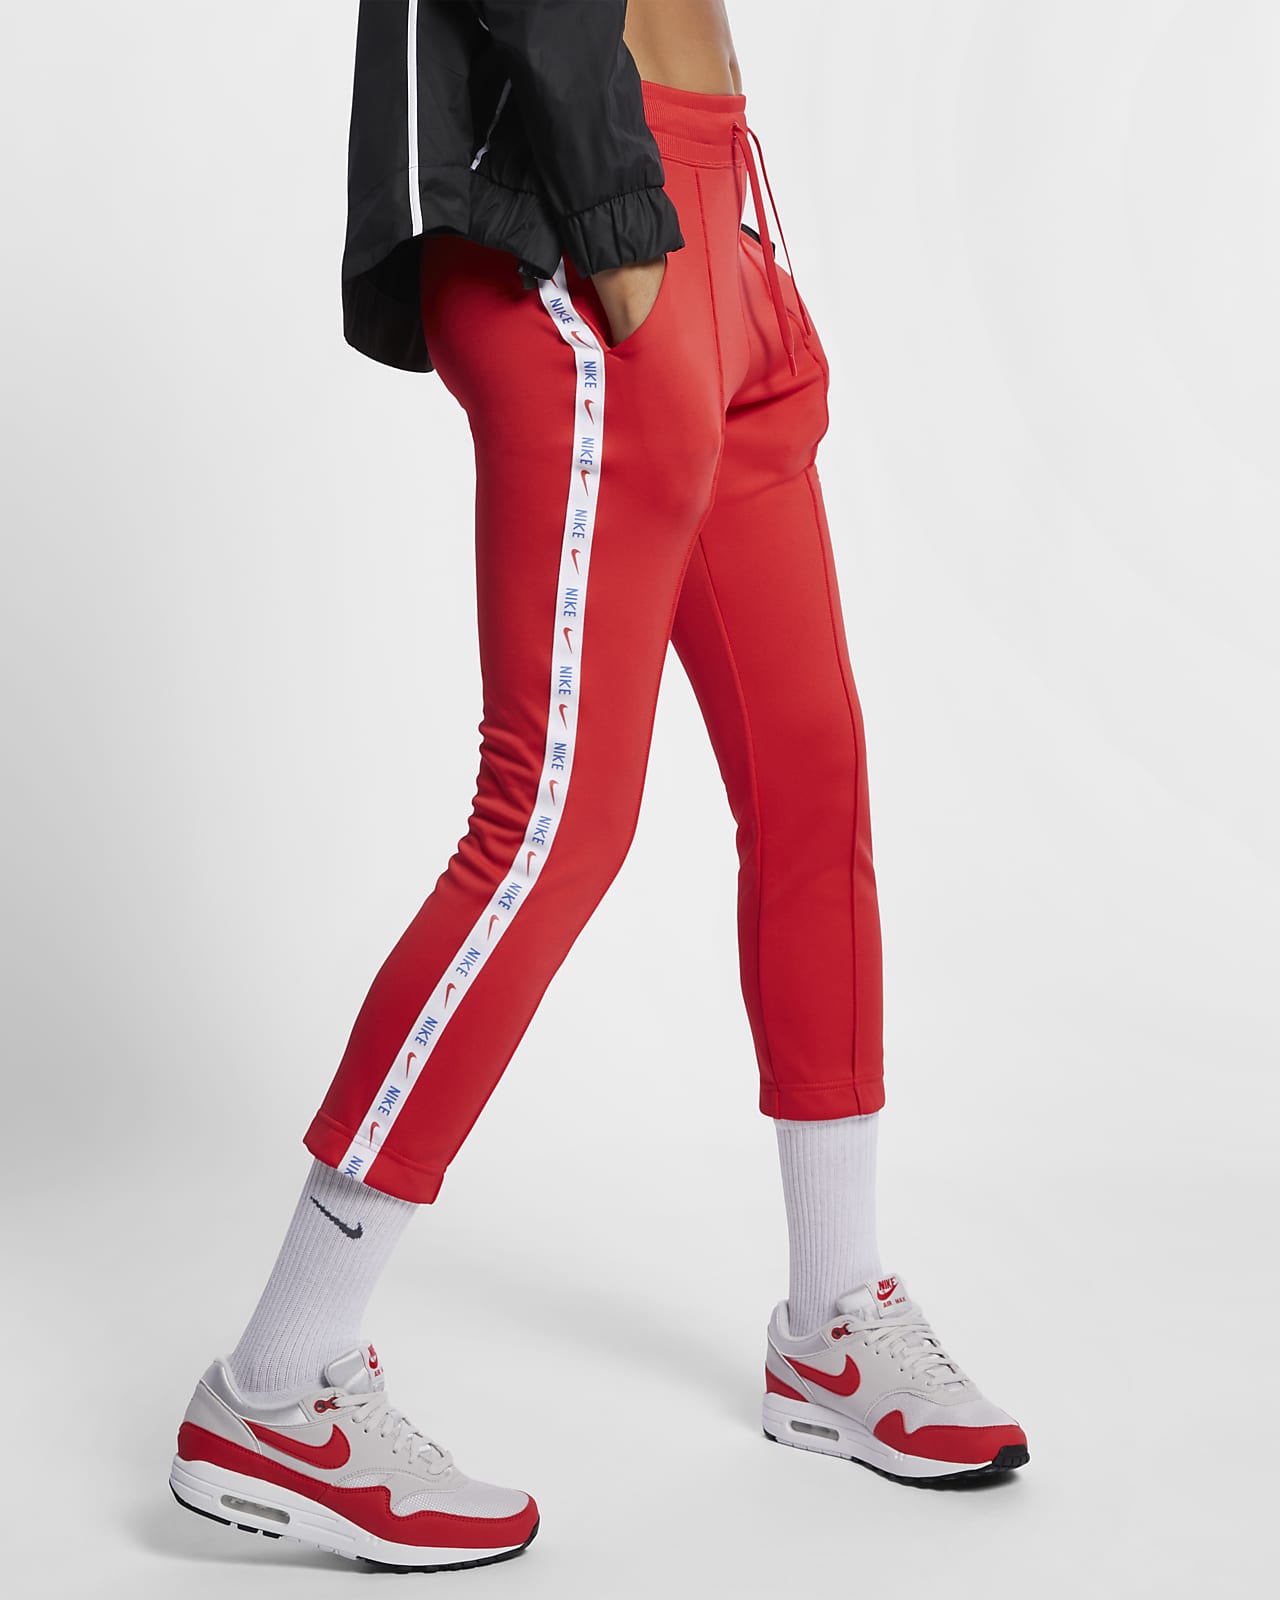 https://static.nike.com/a/images/t_PDP_1280_v1/f_auto,q_auto:eco/giw2wz65vnvsa8ukbnny/sportswear-trousers-dN3Xhc.png